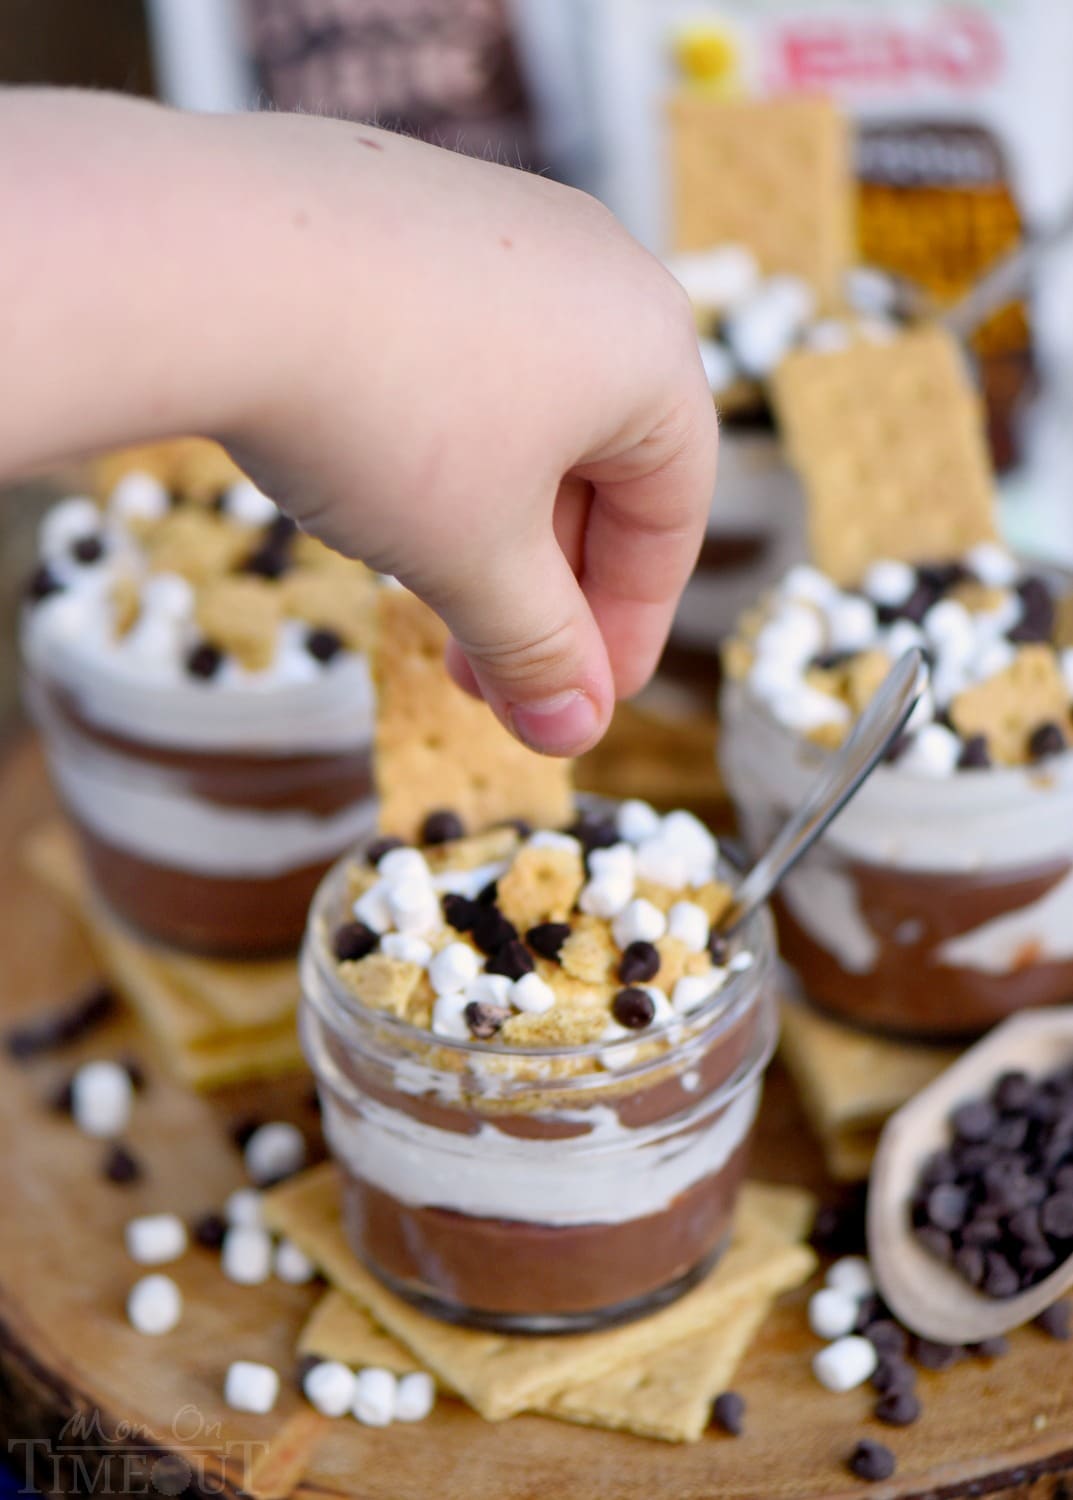 Welcome to your new favorite treat! These S'mores Pudding Parfaits are the perfect easy dessert made with new JELL-O SIMPLY GOOD pudding mix! Simple, sweet goodness that is impossible to resist! // Mom On Timeout #ad